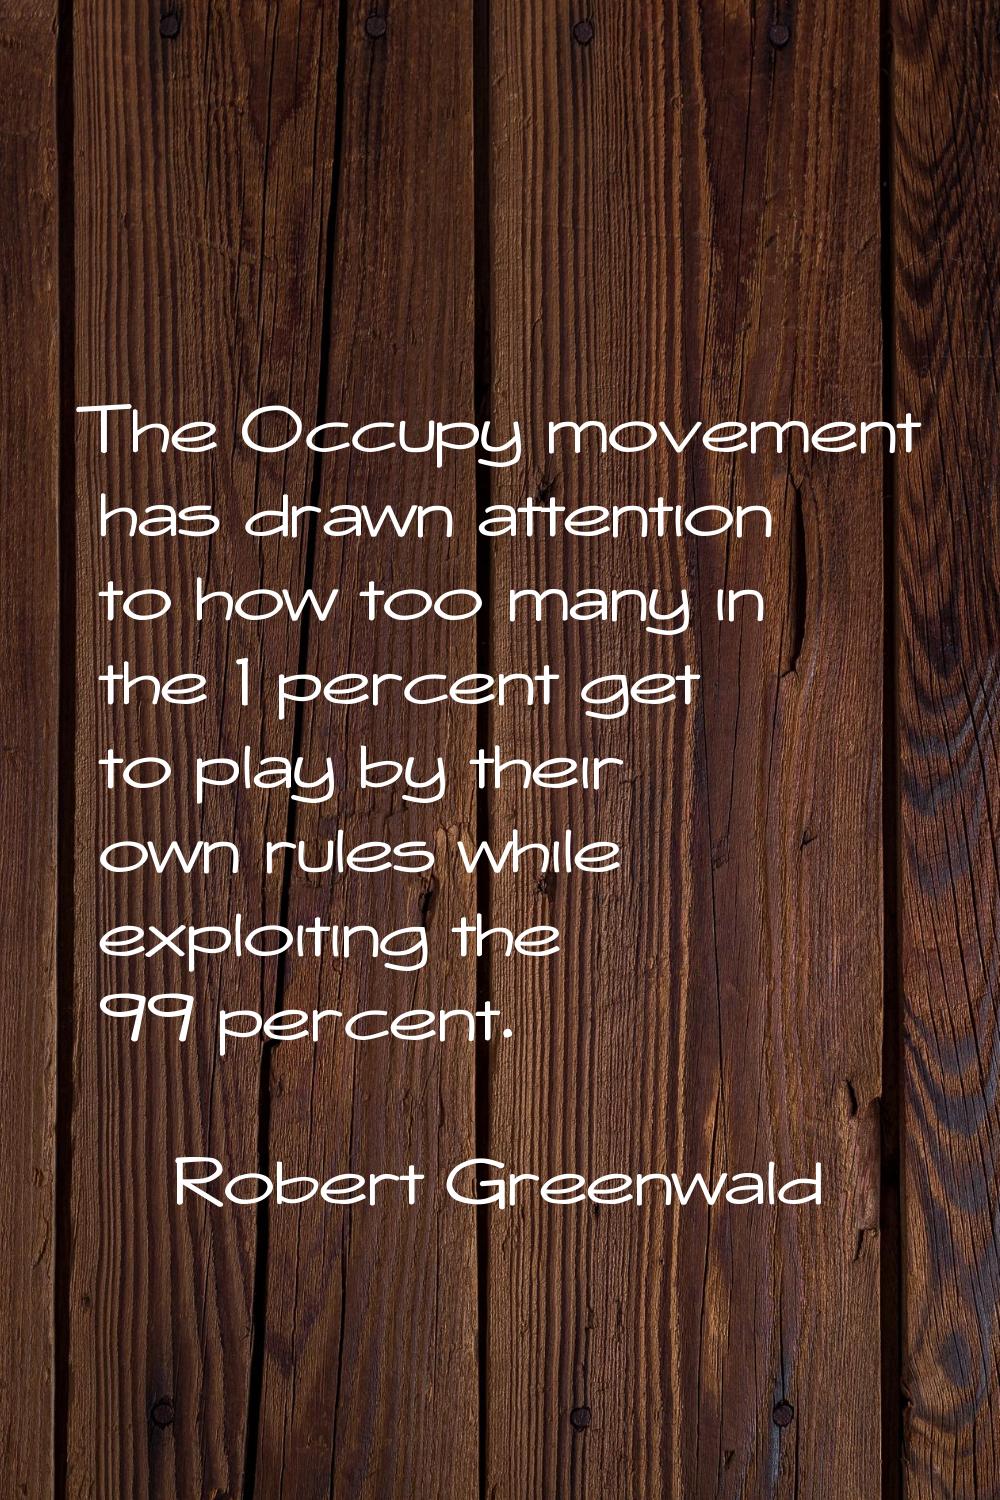 The Occupy movement has drawn attention to how too many in the 1 percent get to play by their own r